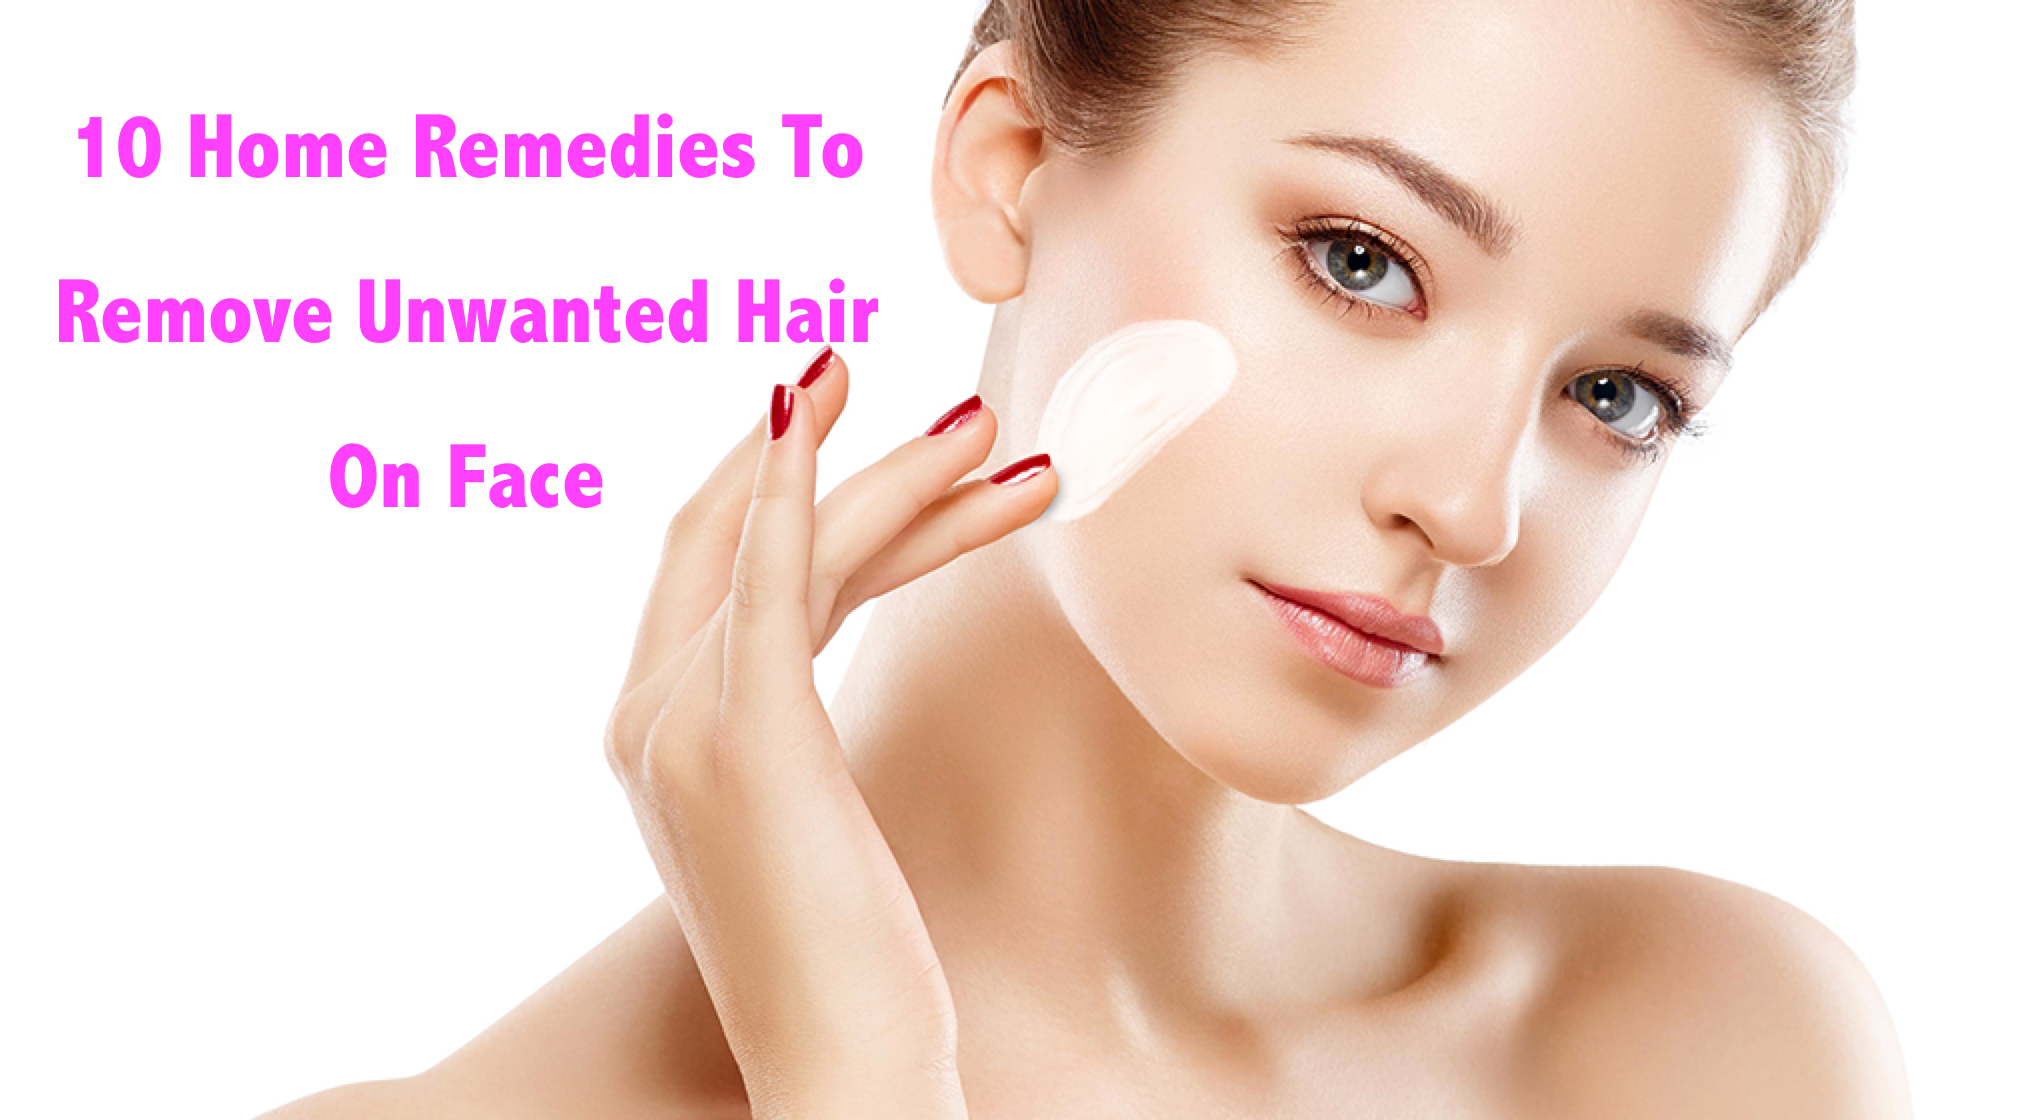 10 Home Remedies To Remove Unwanted Hair on Face - SprunWorld